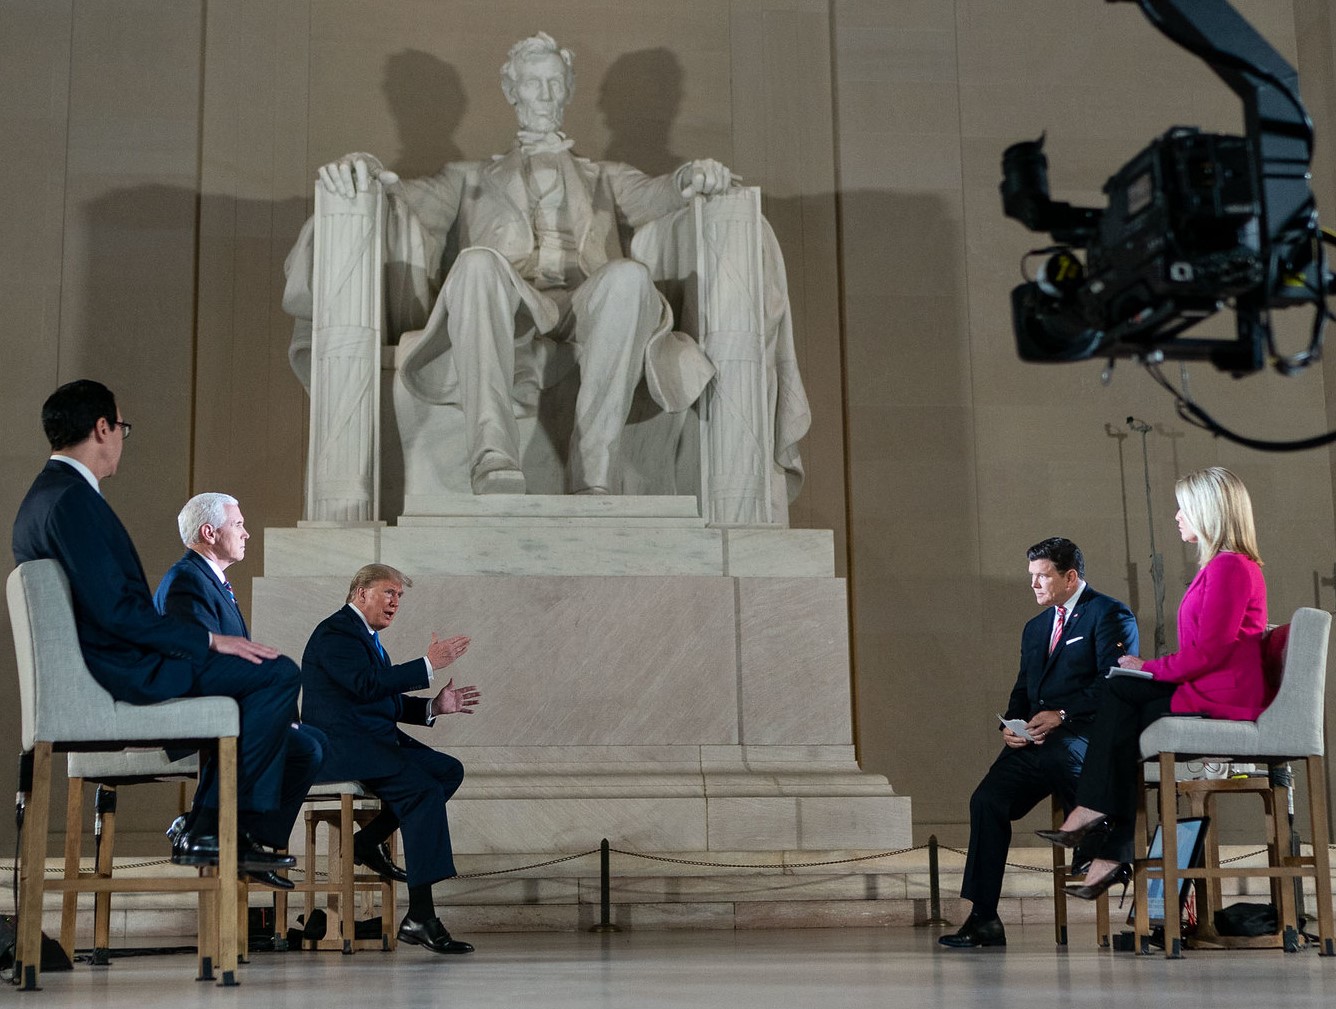 After stopping task force briefings at the White House, President Trump gave an interview to Fox News in Washington DC’s Lincoln Memorial on Sunday.